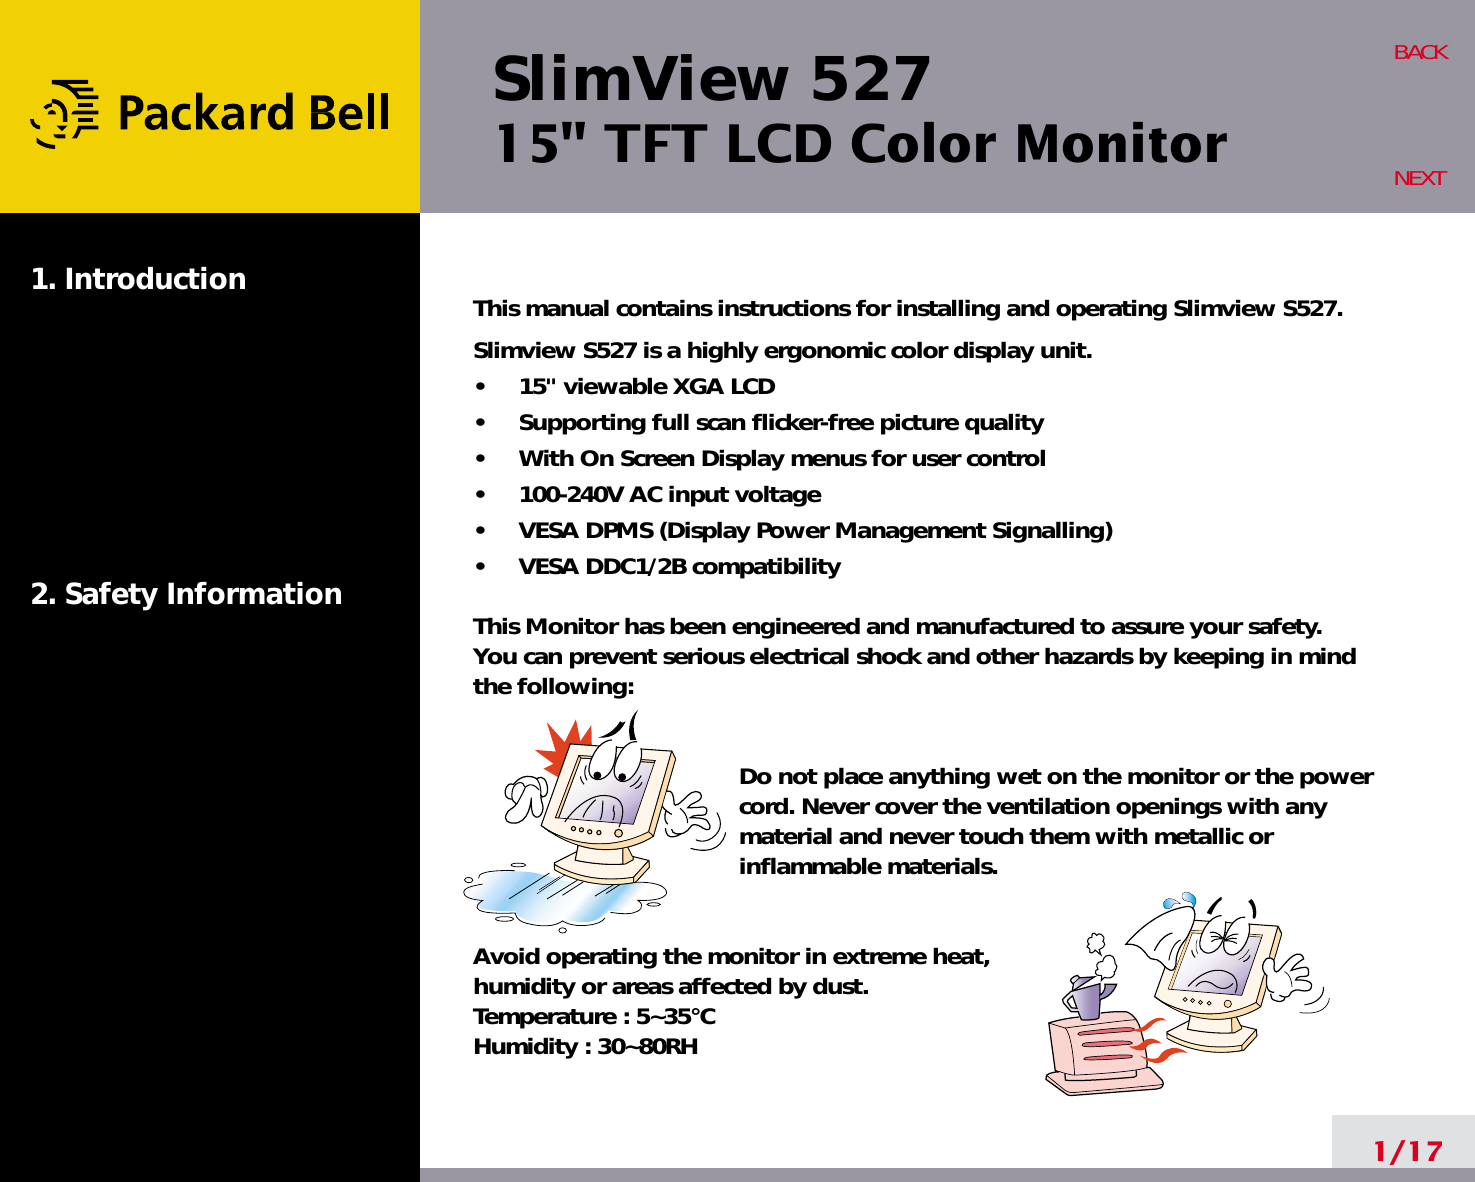 SlimView 52715&quot; TFT LCD Color Monitor1. Introduction2. Safety Information1/17BACKNEXTThis manual contains instructions for installing and operating Slimview S527.Slimview S527 is a highly ergonomic color display unit.•     15&quot; viewable XGA LCD•     Supporting full scan flicker-free picture quality•     With On Screen Display menus for user control•     100-240V AC input voltage•     VESA DPMS (Display Power Management Signalling)•     VESA DDC1/2B compatibilityThis Monitor has been engineered and manufactured to assure your safety. You can prevent serious electrical shock and other hazards by keeping in mind the following:Do not place anything wet on the monitor or the powercord. Never cover the ventilation openings with anymaterial and never touch them with metallic or inflammable materials.Avoid operating the monitor in extreme heat, humidity or areas affected by dust. Temperature : 5~35°CHumidity : 30~80RH 